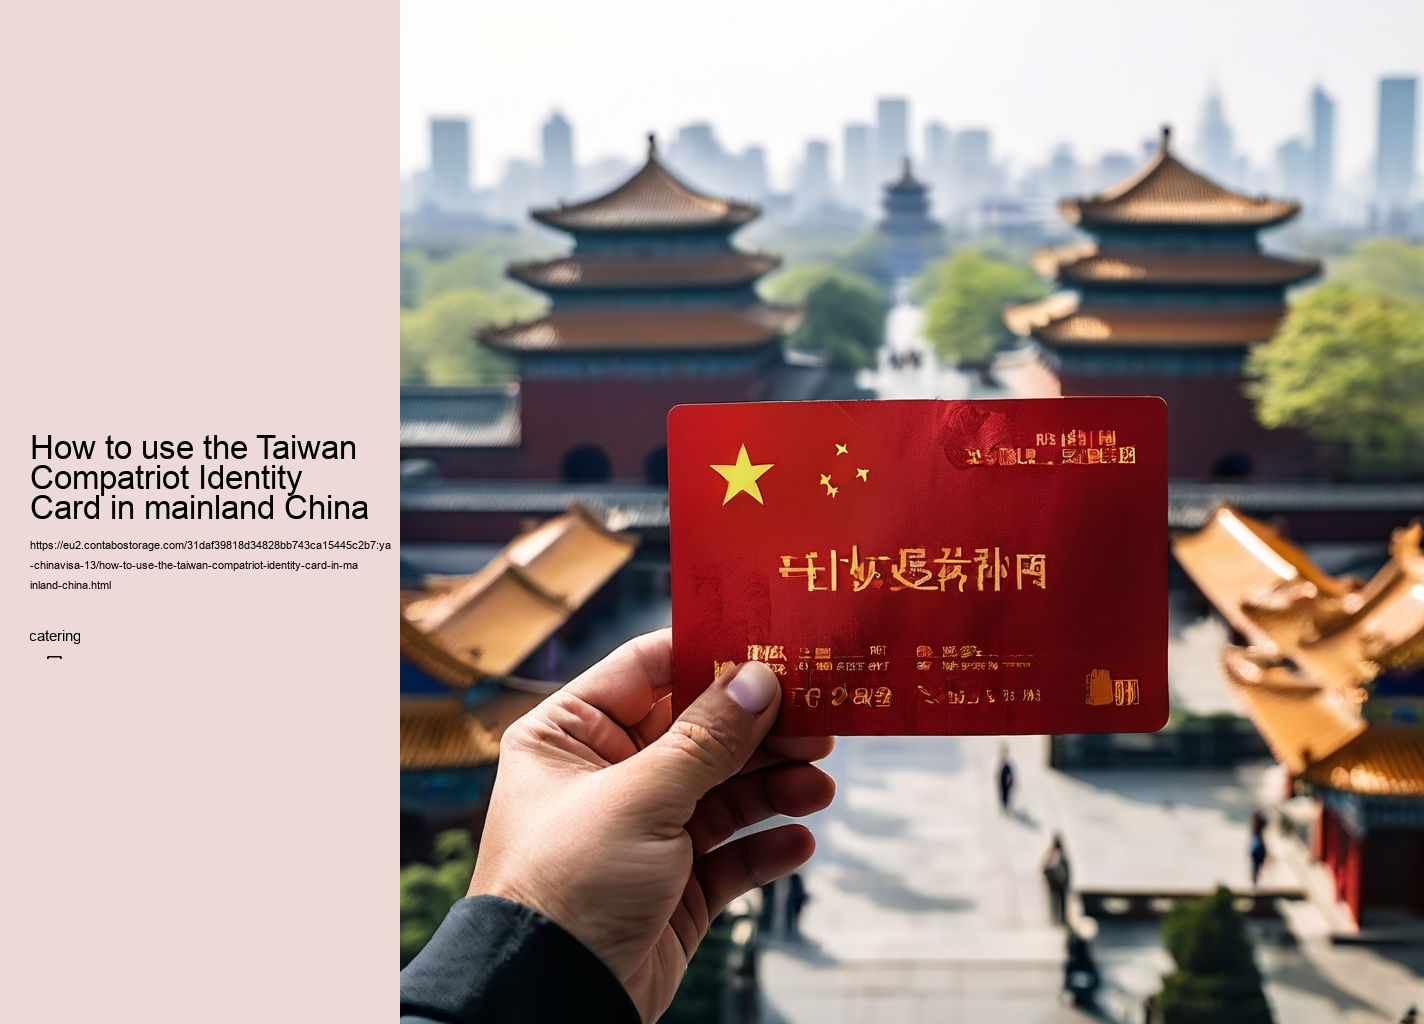 How to use the Taiwan Compatriot Identity Card in mainland China